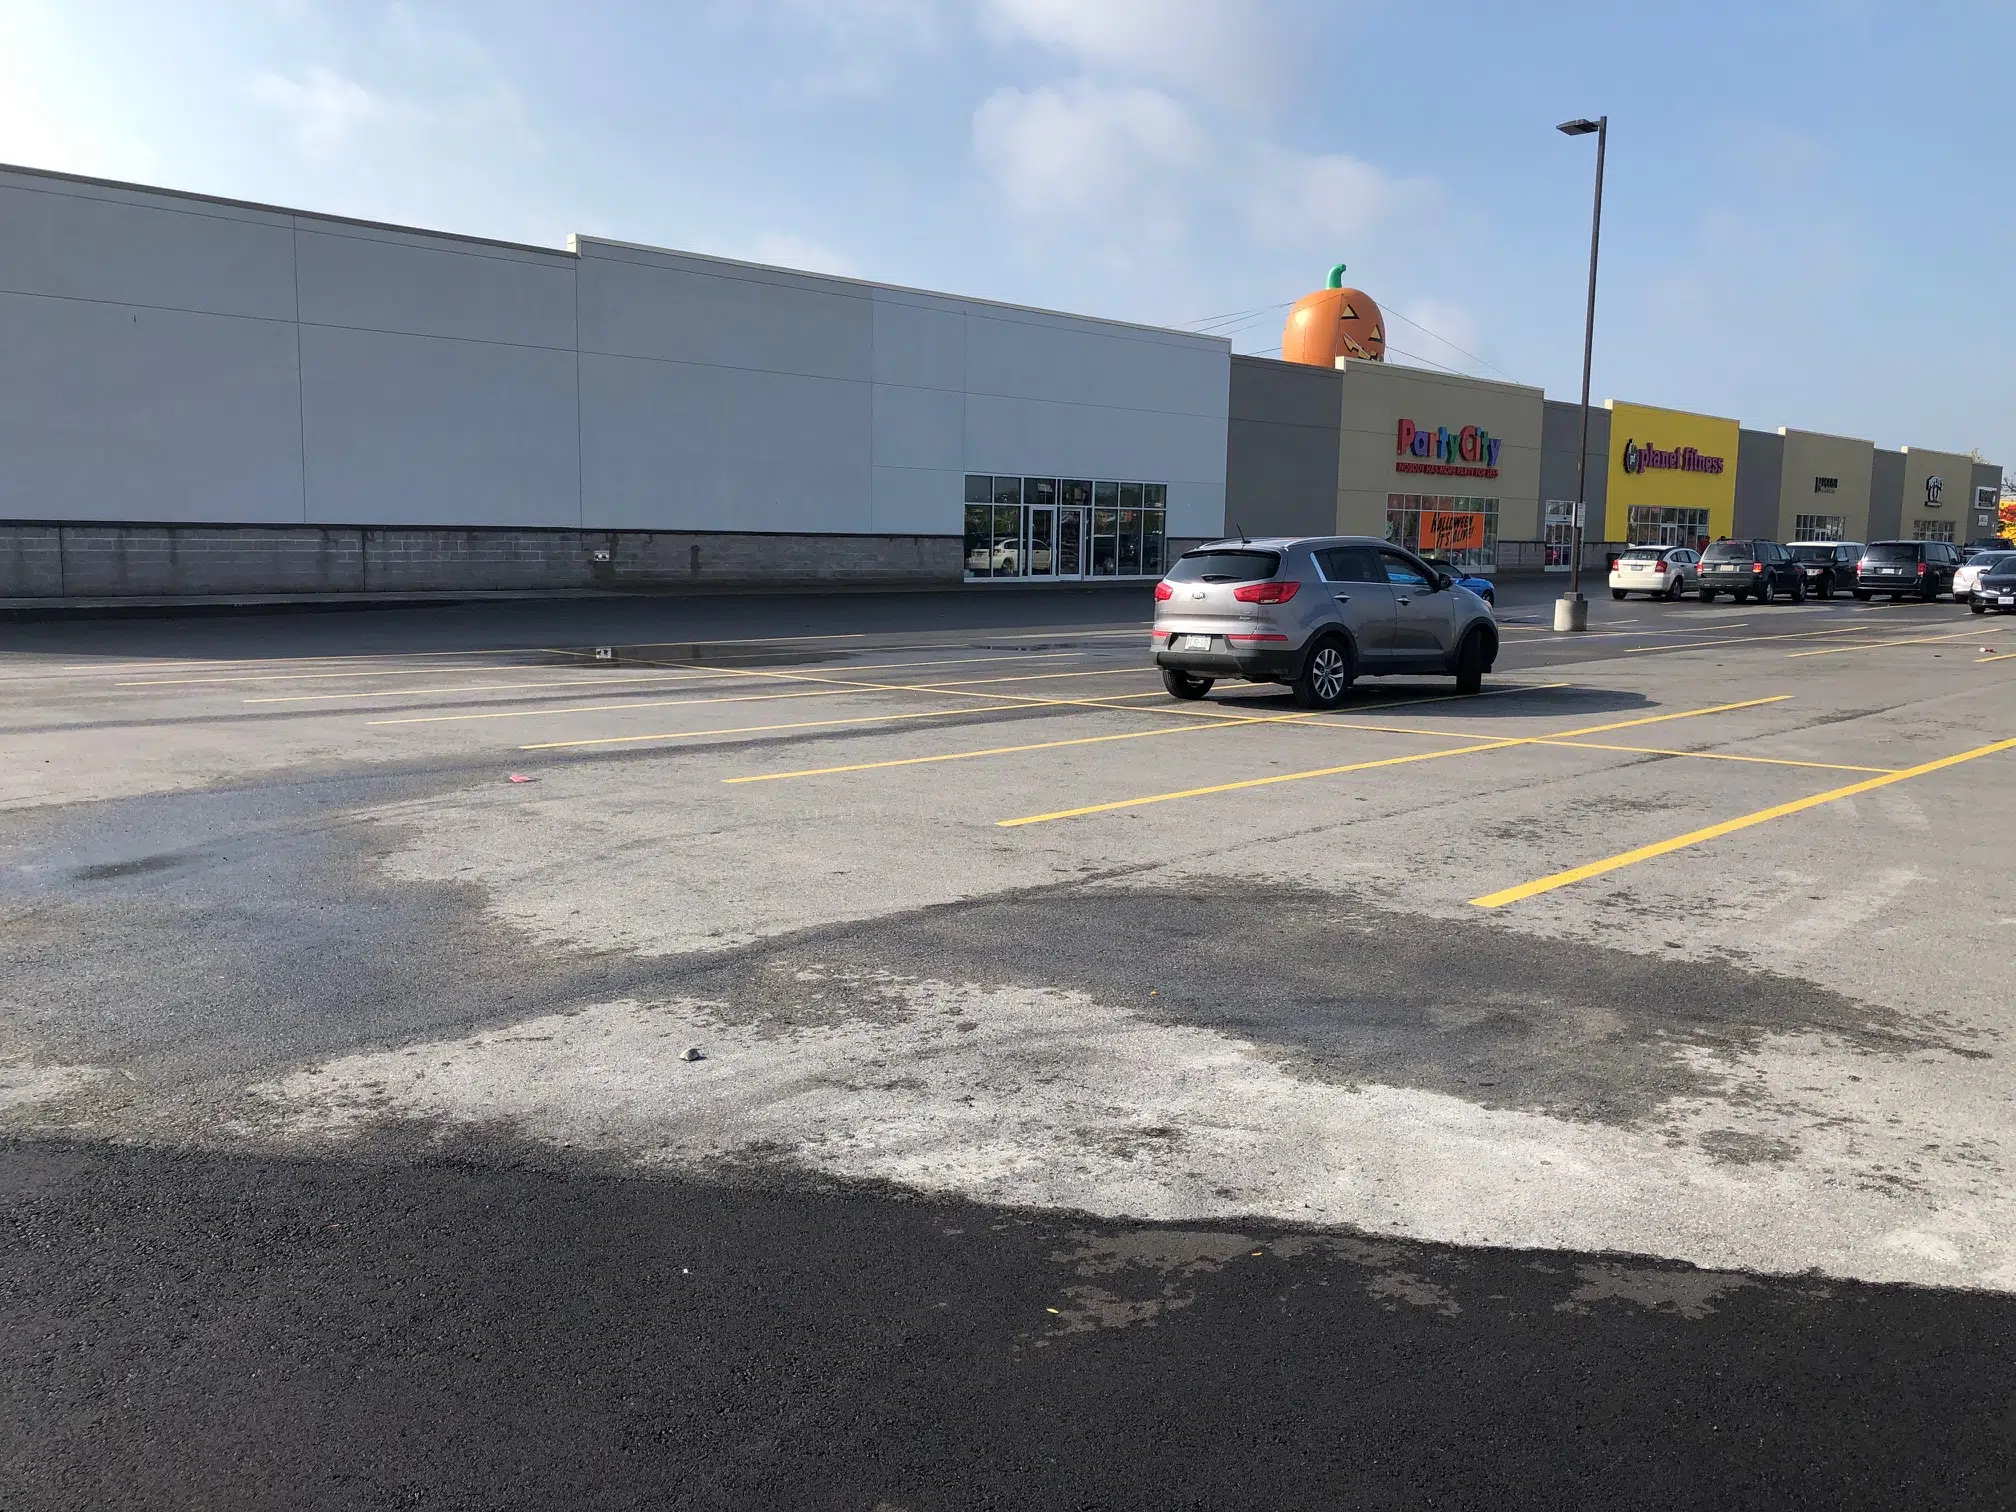 New clothing store and potential restaurant earmarked for old Zellers plaza